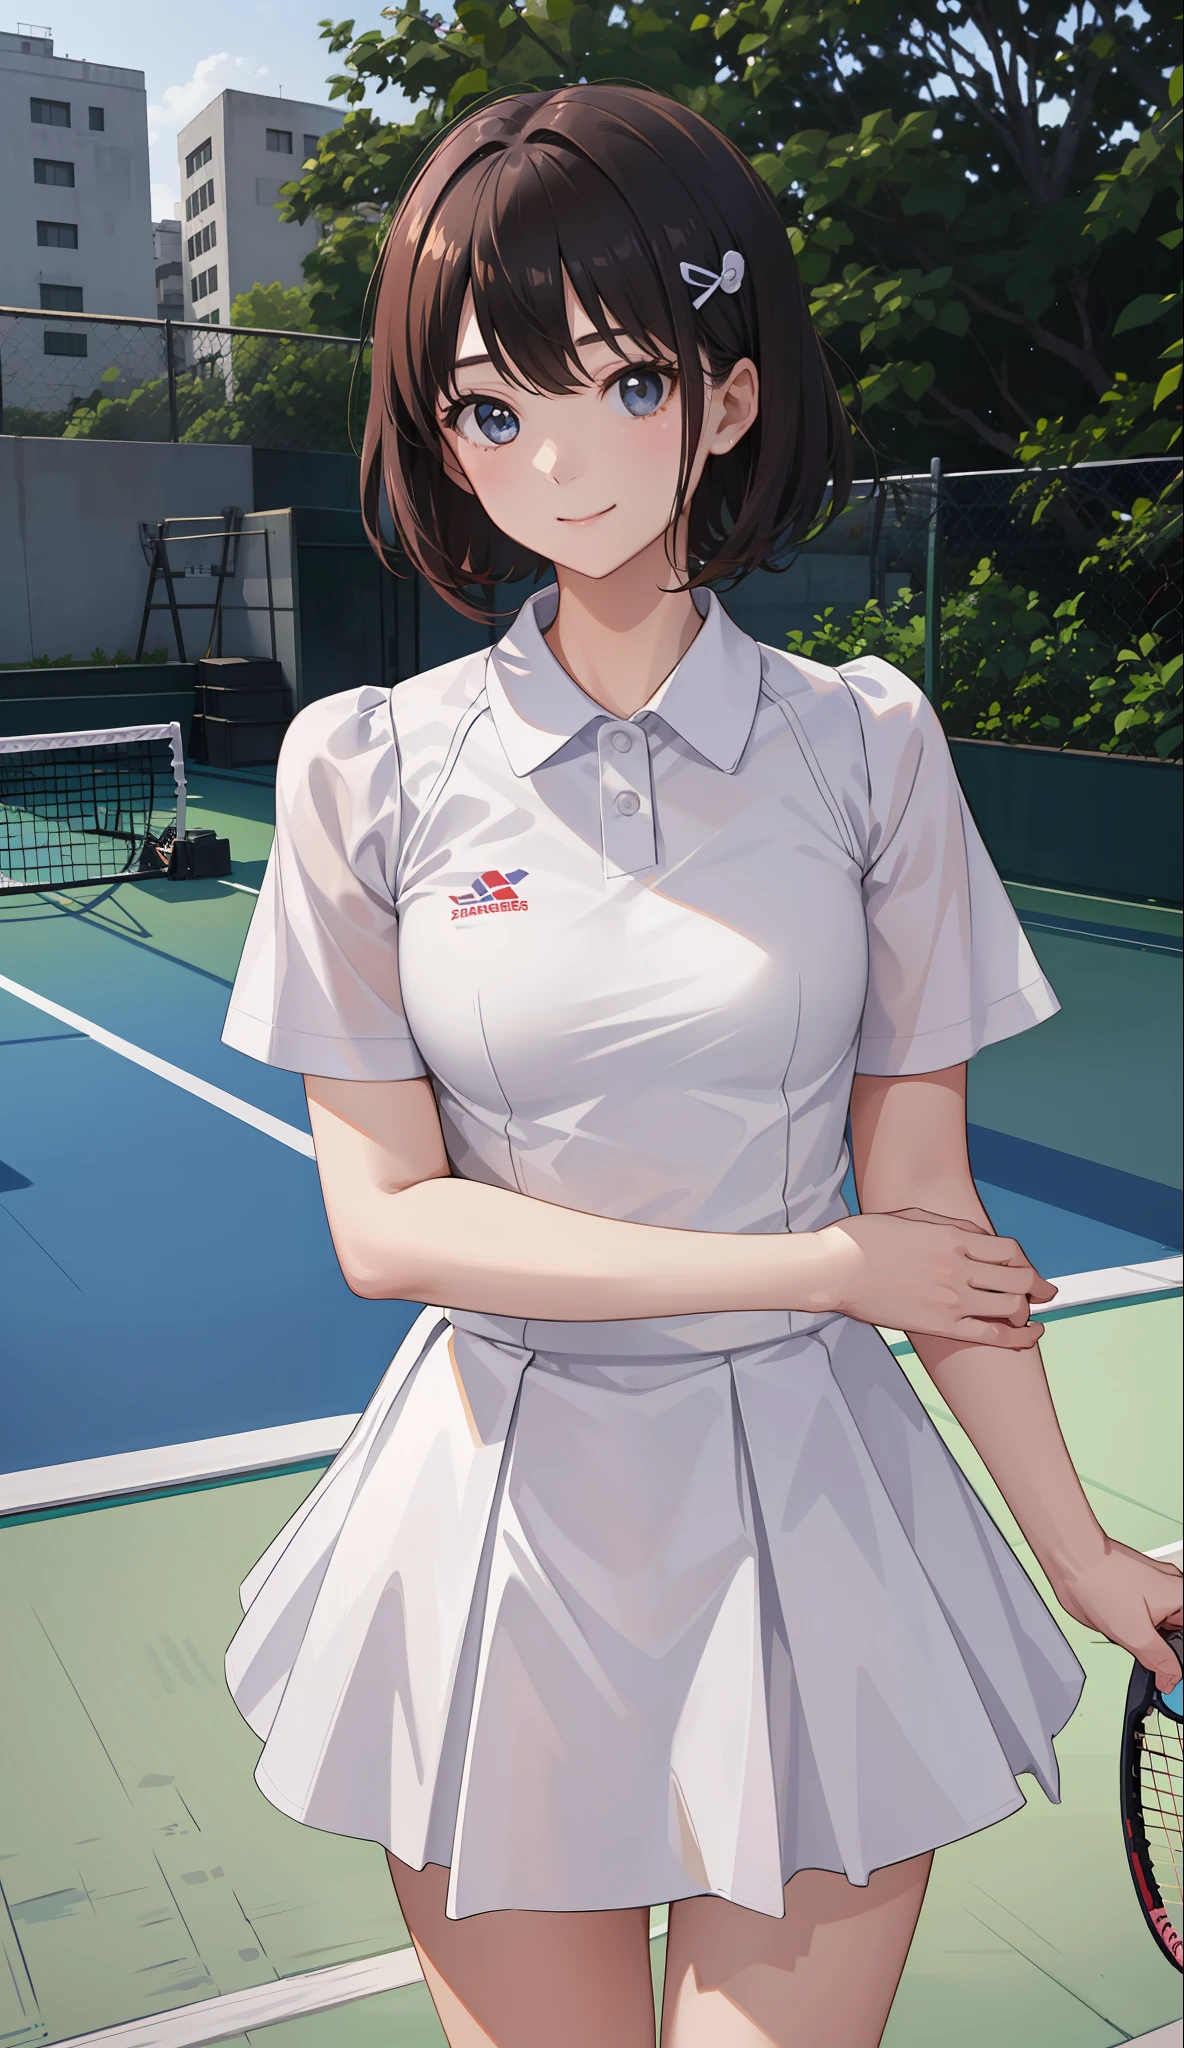 １The girls、shirts、pleatedskirt、17 age、Bob Hair Style、A smile、A delightful!、japanes、enmaided、Chromo-white skin、Beautiful eyes、（small tits）、Playing tennis、Wimbledon、Wearing white tennis wear、light、Upper body portrait、